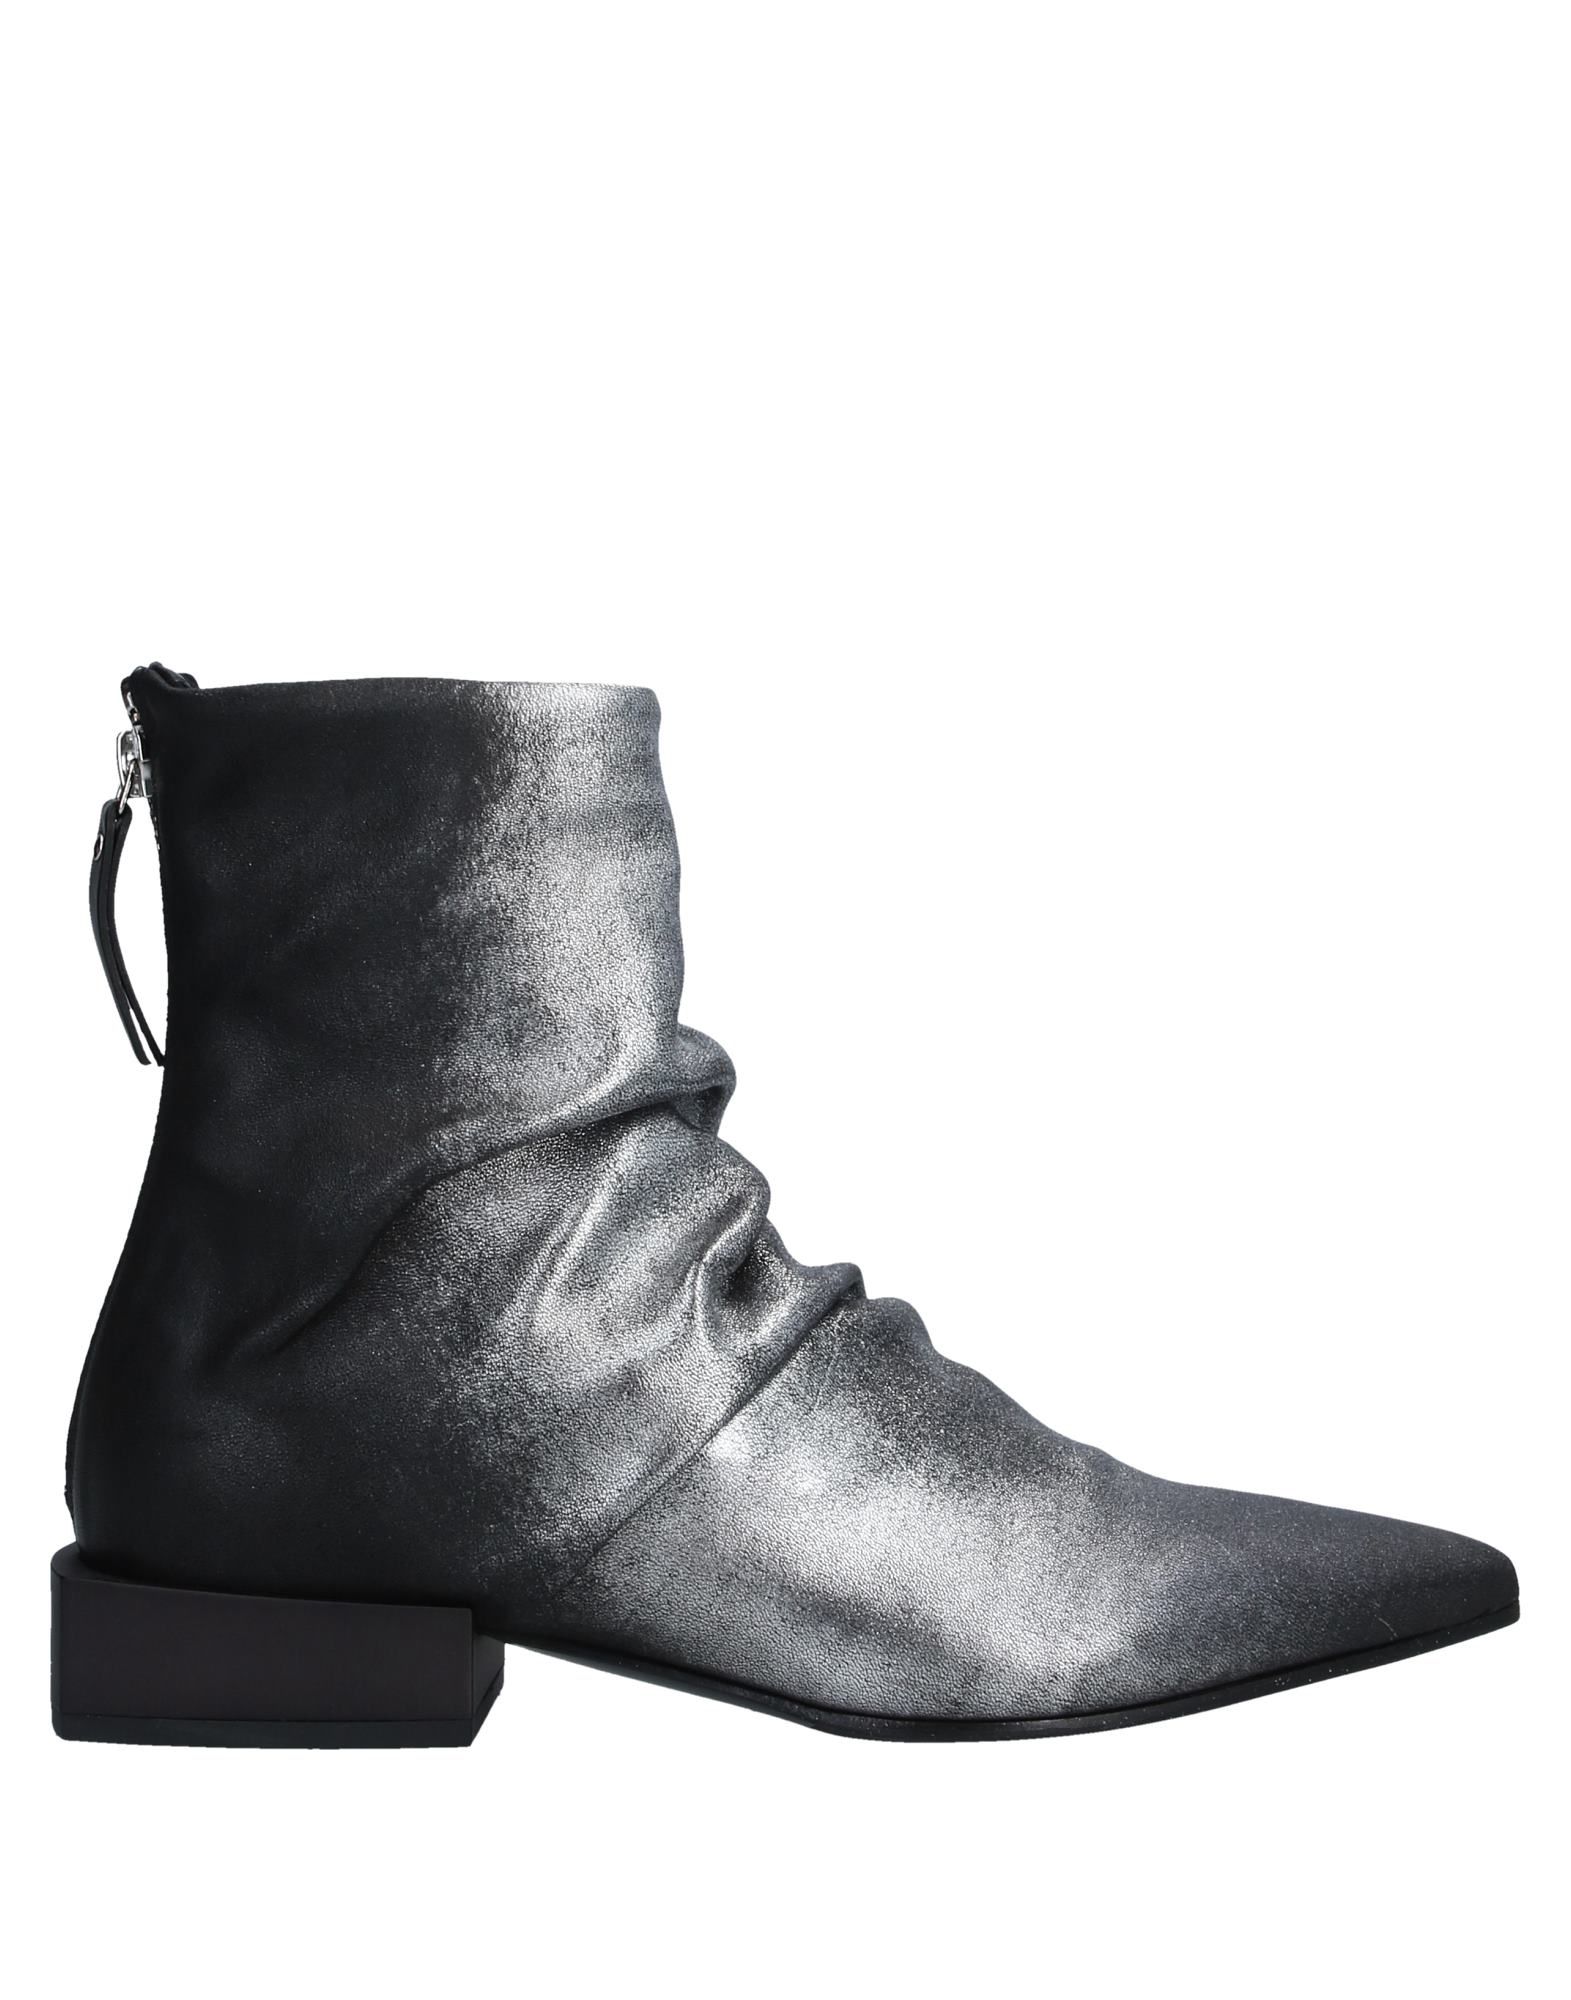 VIC MATIE Ankle boots - Item 11707212